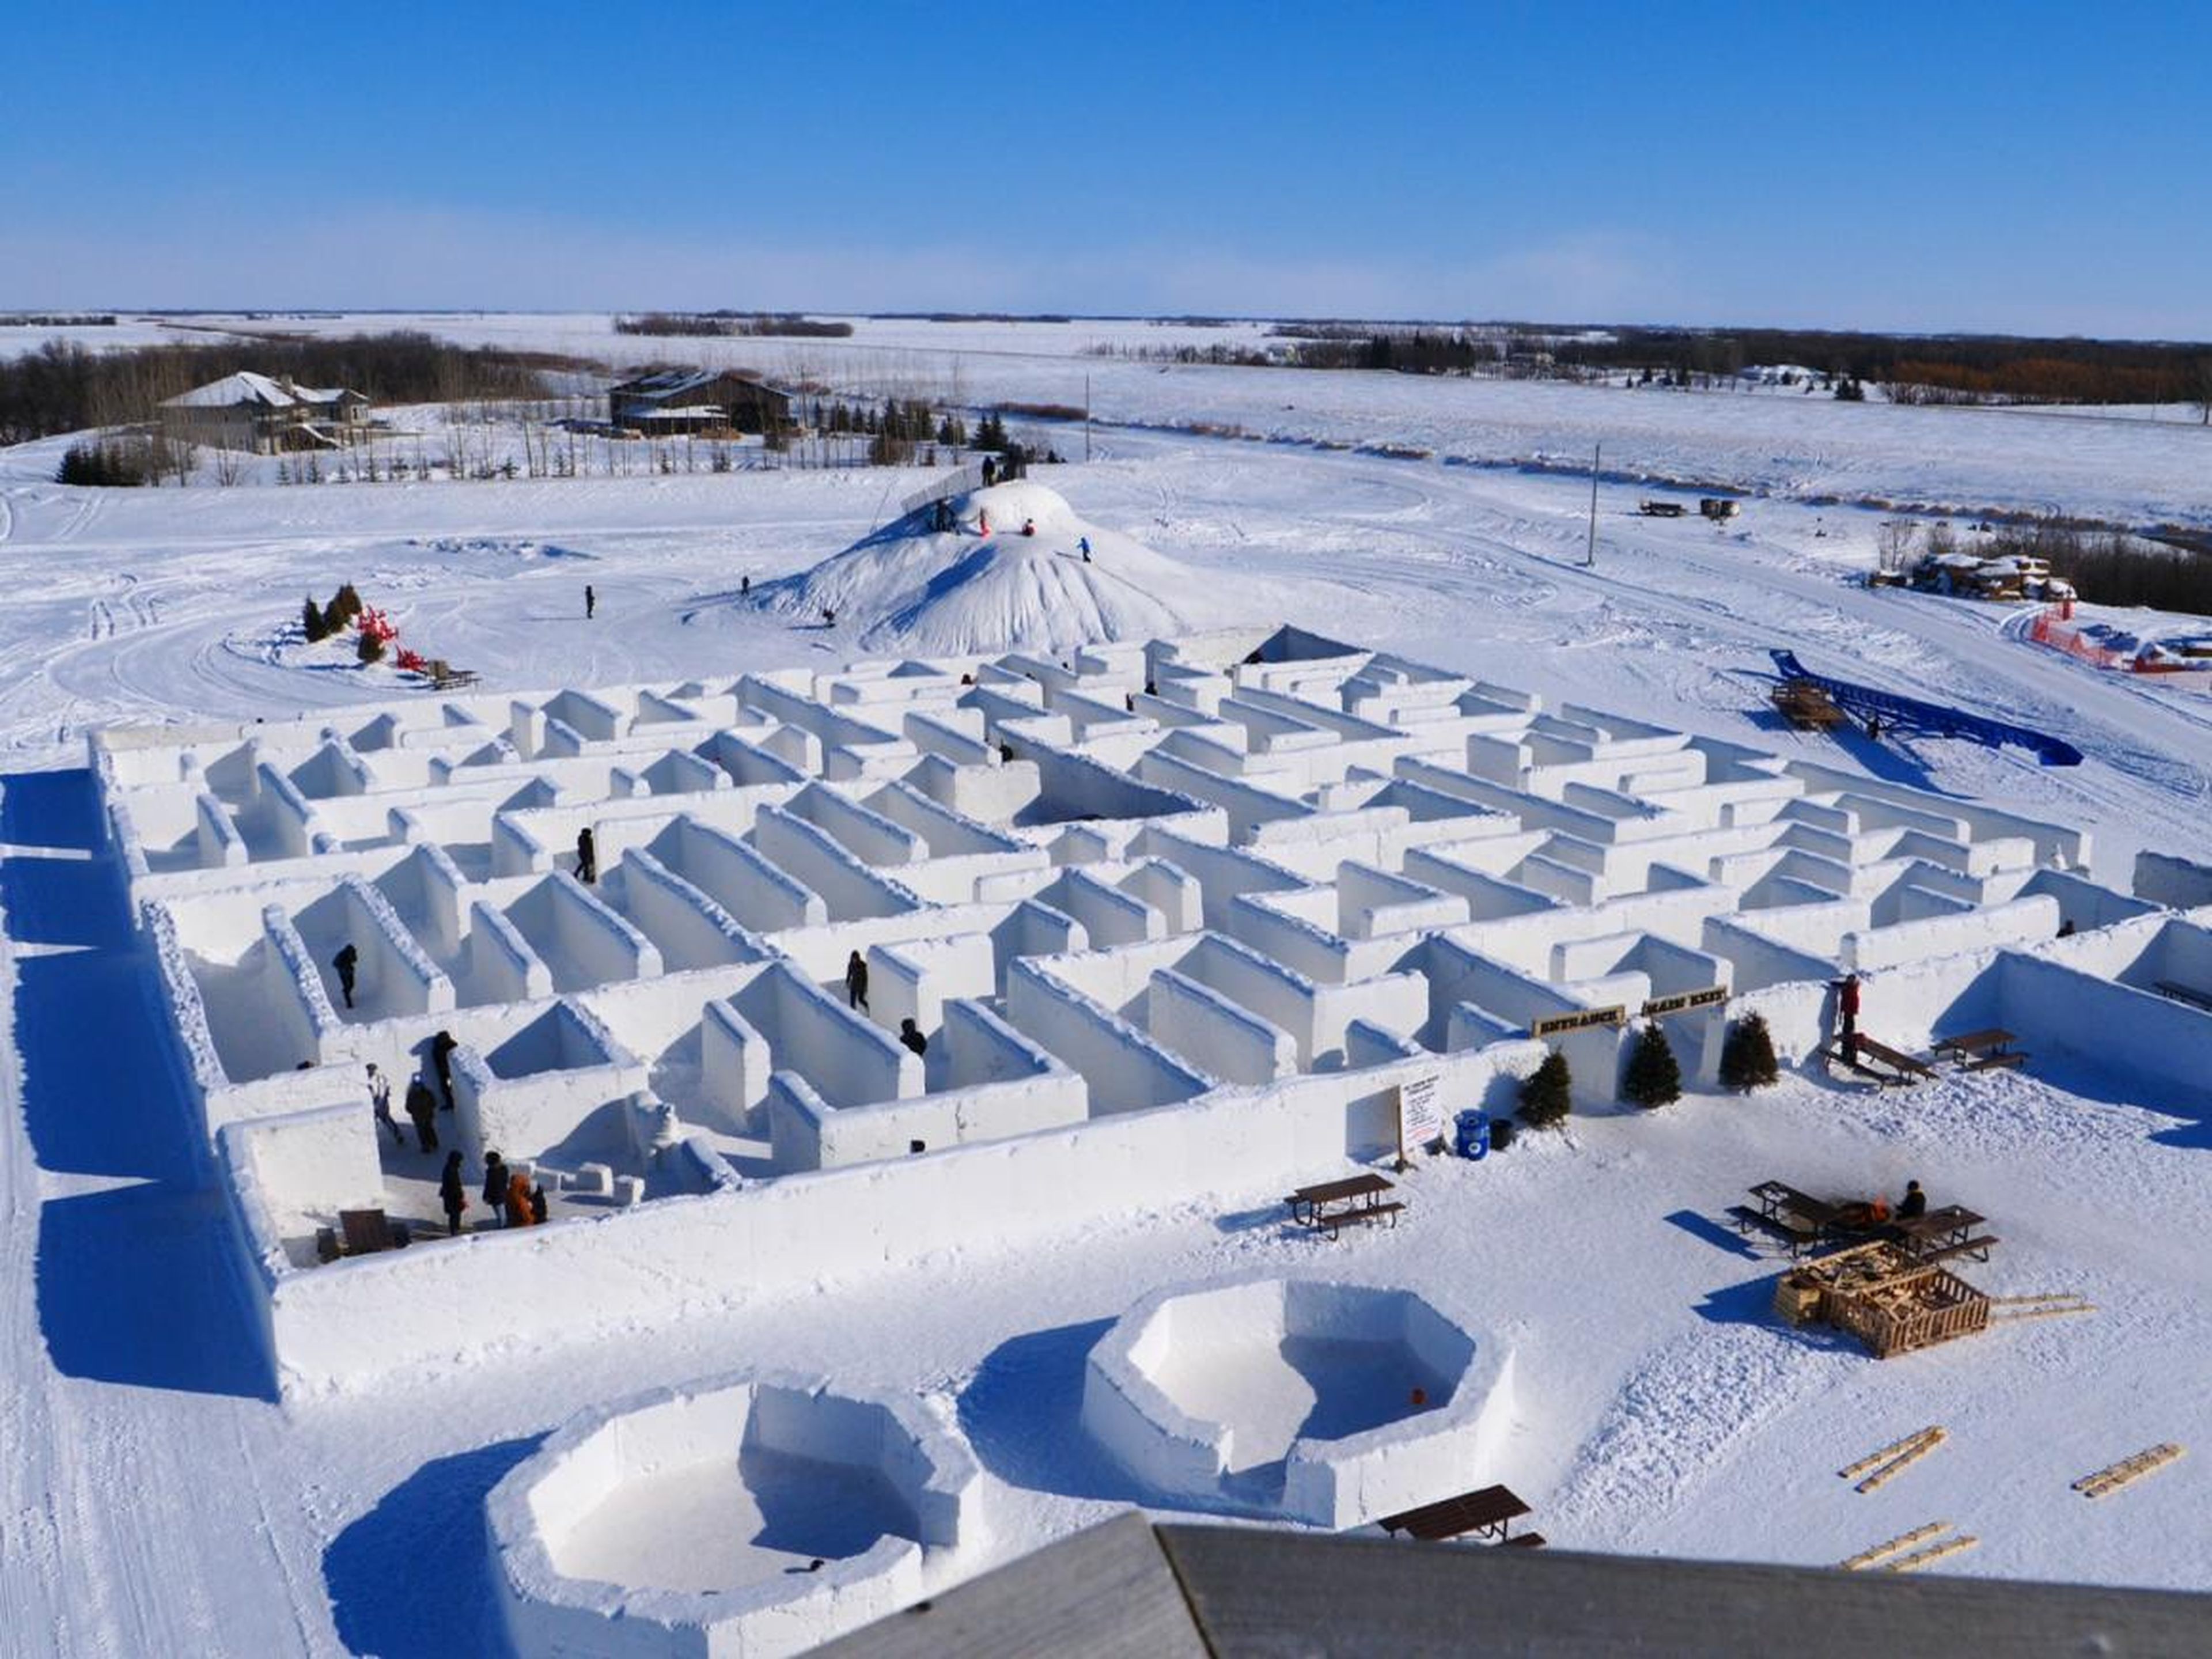 Imagine getting lost in this freezing maze.